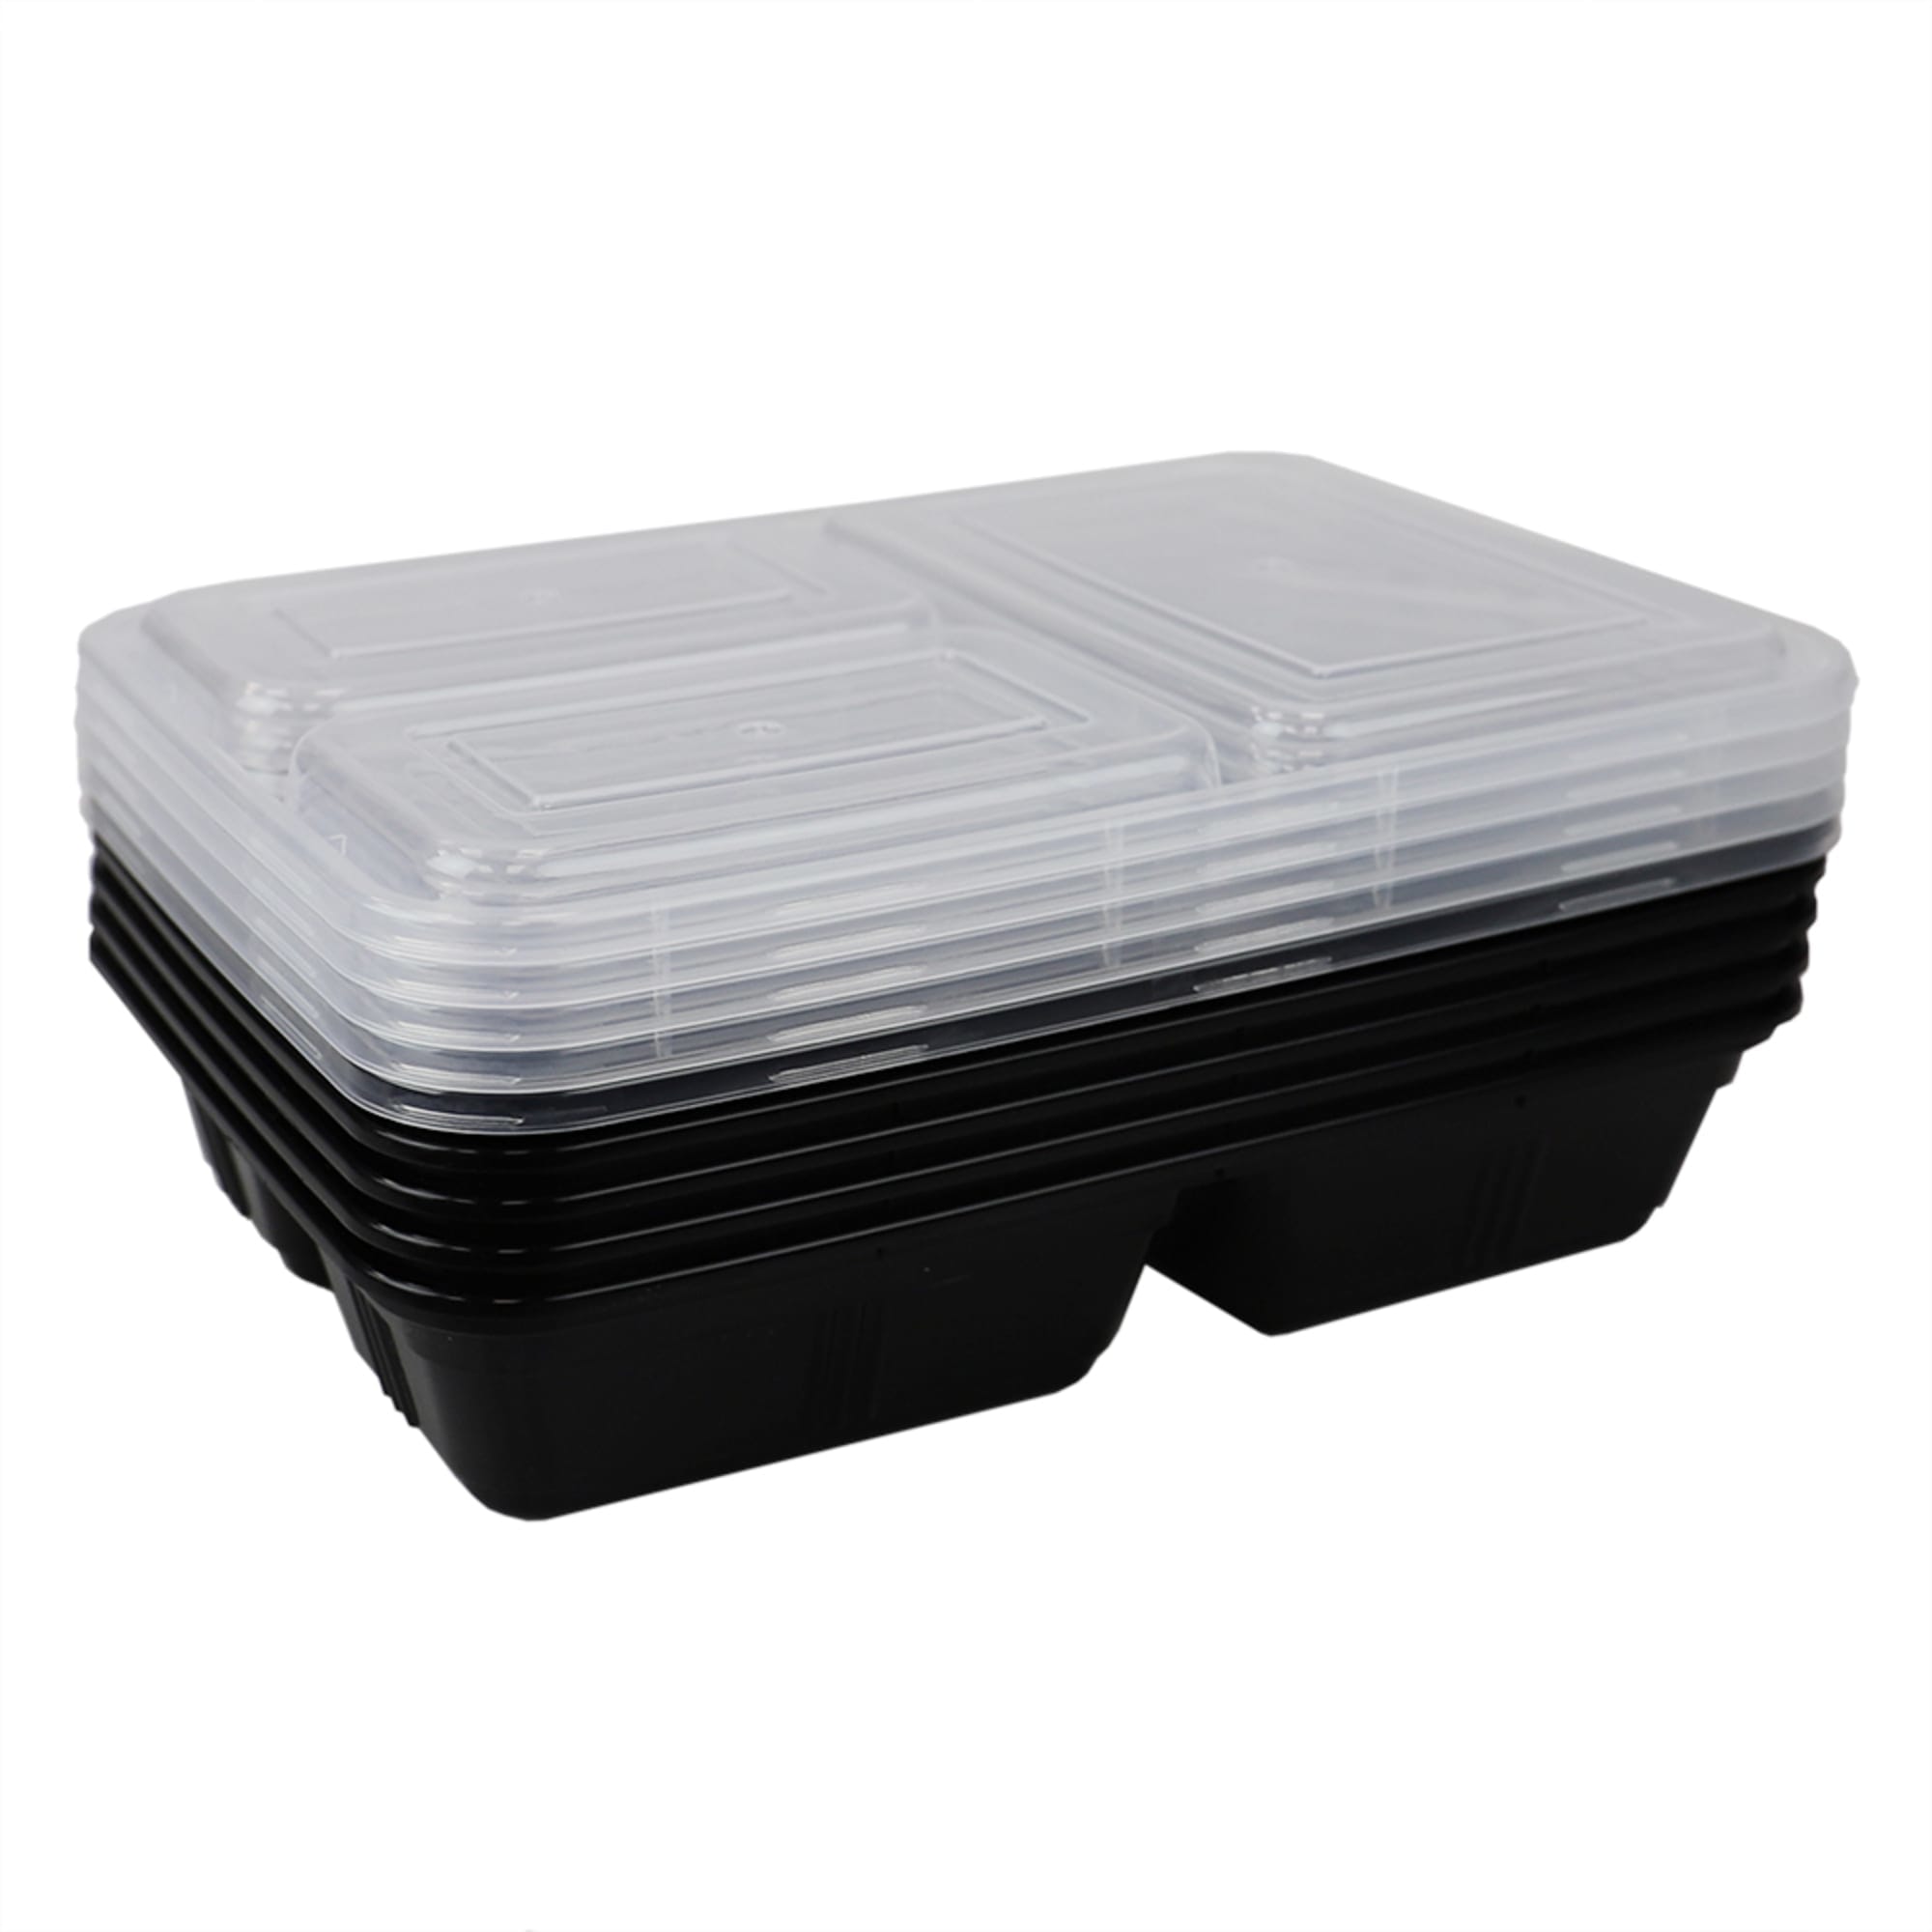 Home Basic 10 Piece 3 Compartment BPA-Free Plastic Meal Prep Containers, Black $4.00 EACH, CASE PACK OF 12